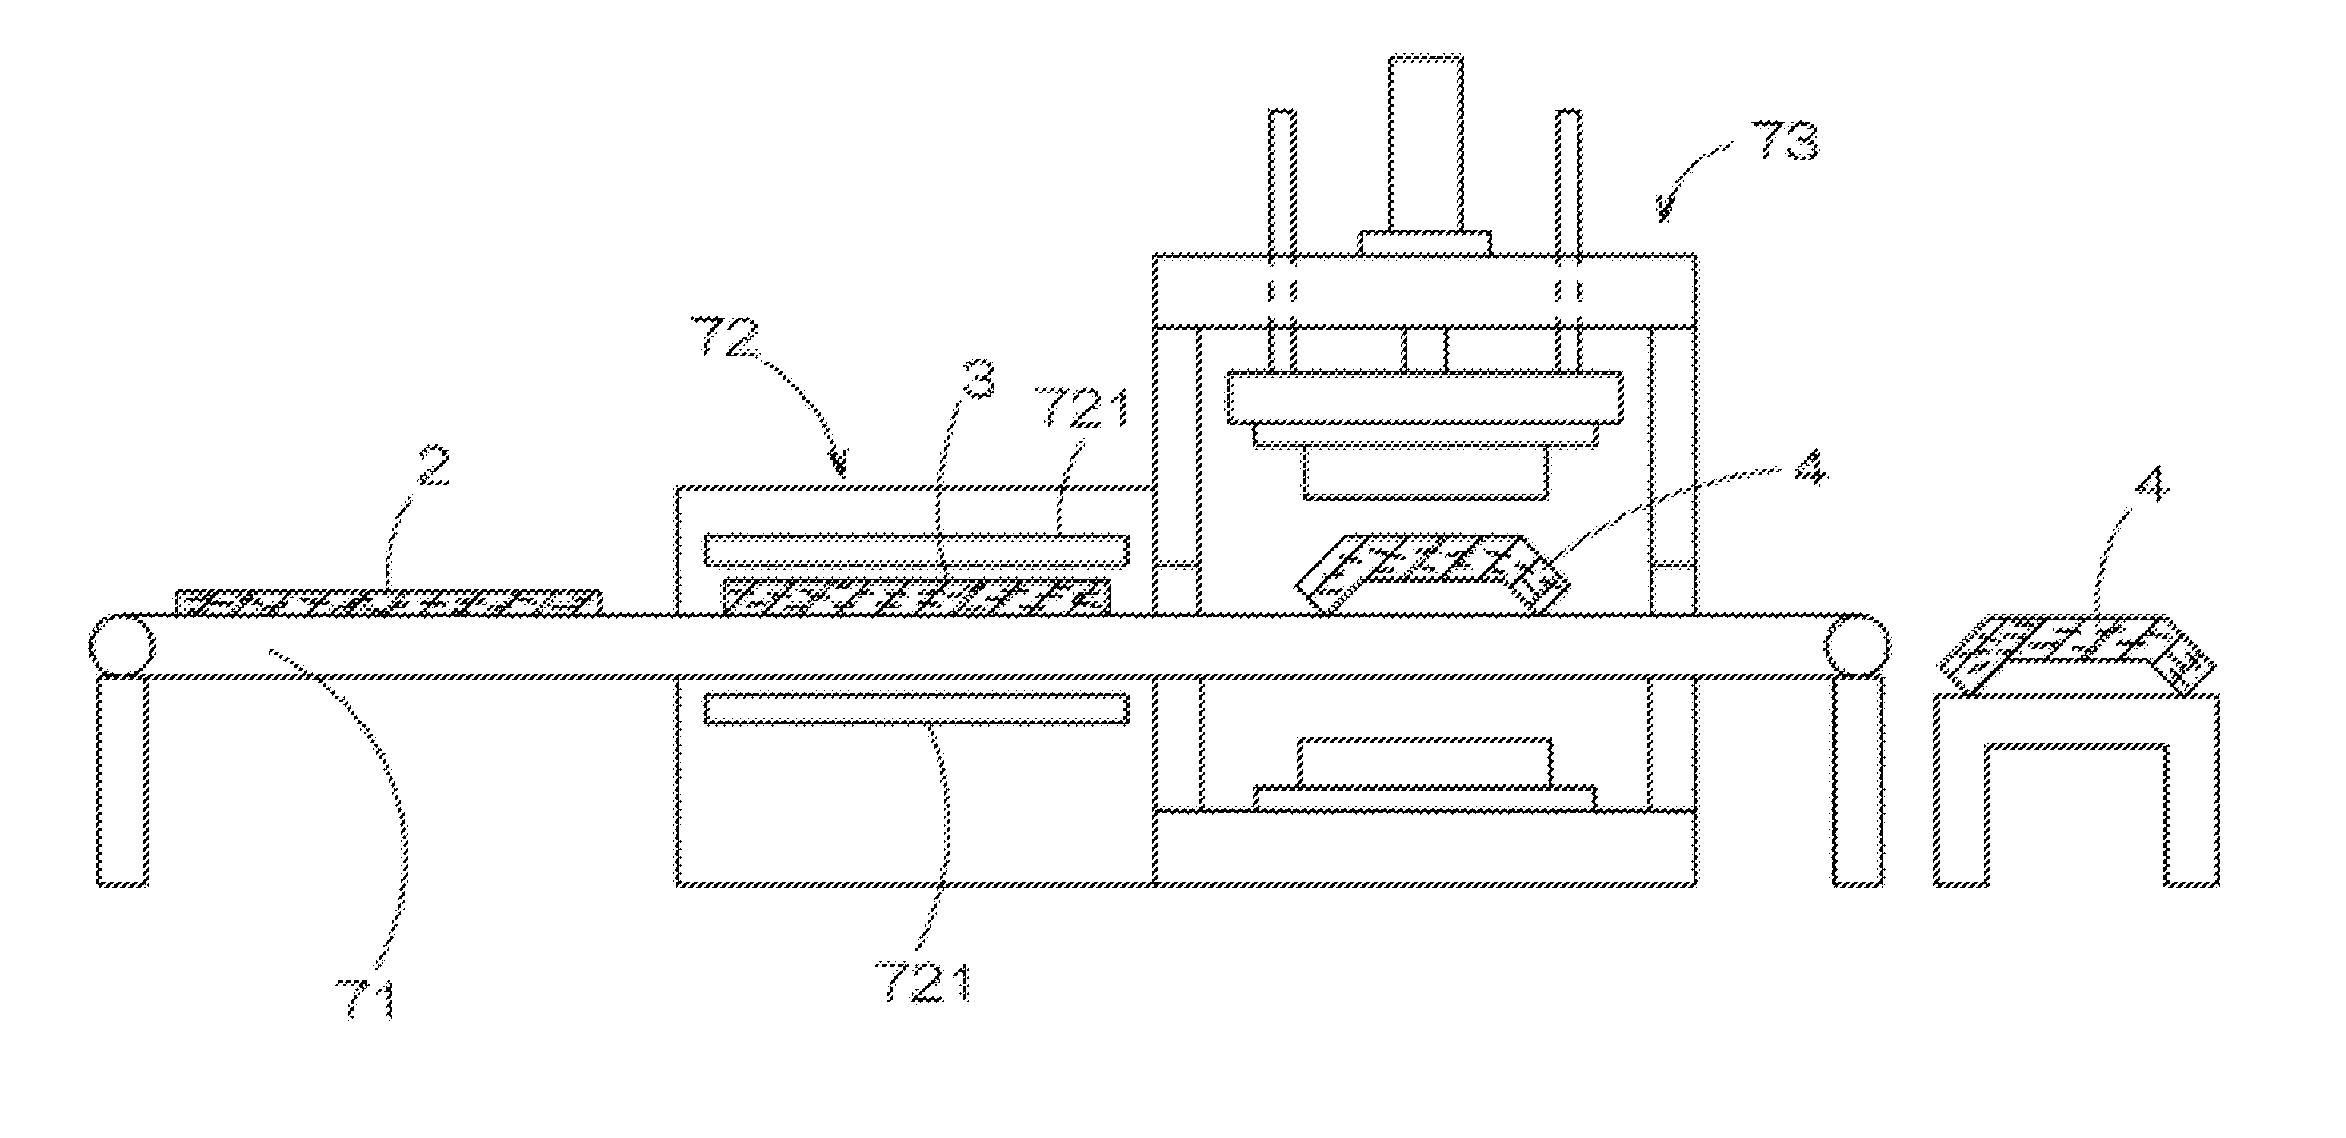 Method for manufacturing thermally expandable base material for vehicle interior and method for manufacturing base material for vehicle interior using same